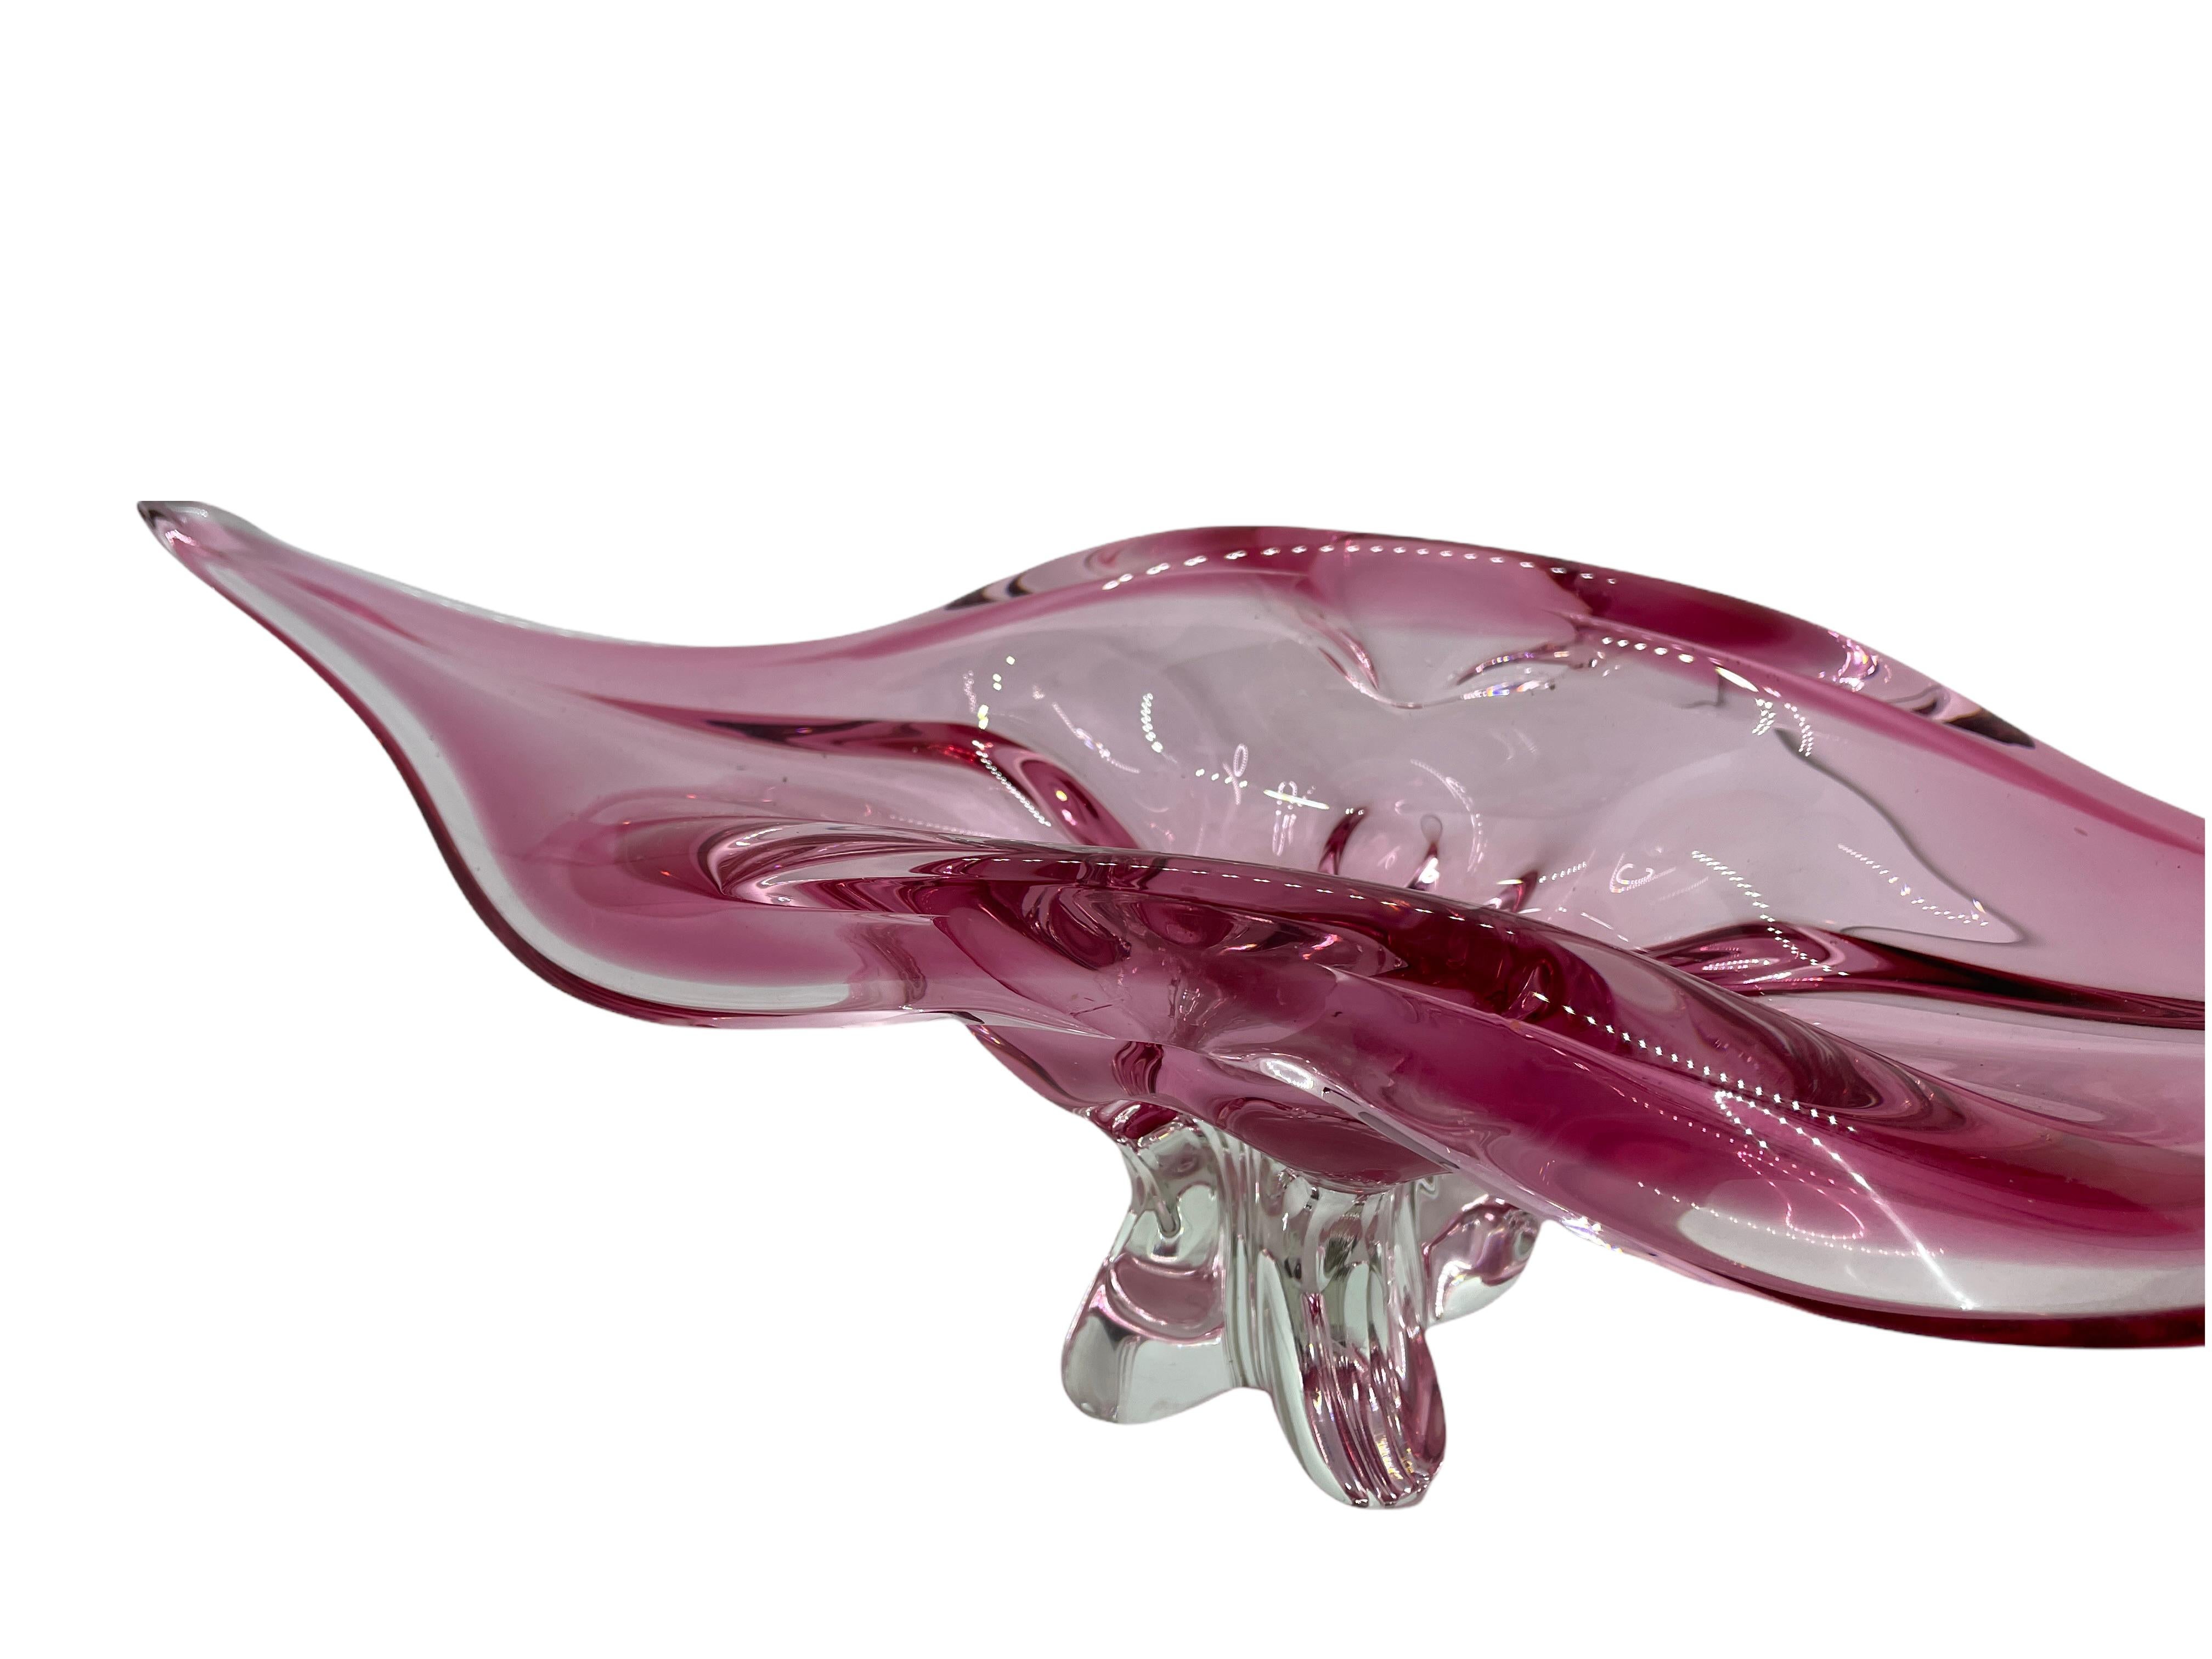 Late 20th Century Stunning Large Murano Art Glass Sommerso Bowl Catchall Vintage, Italy, 1970s